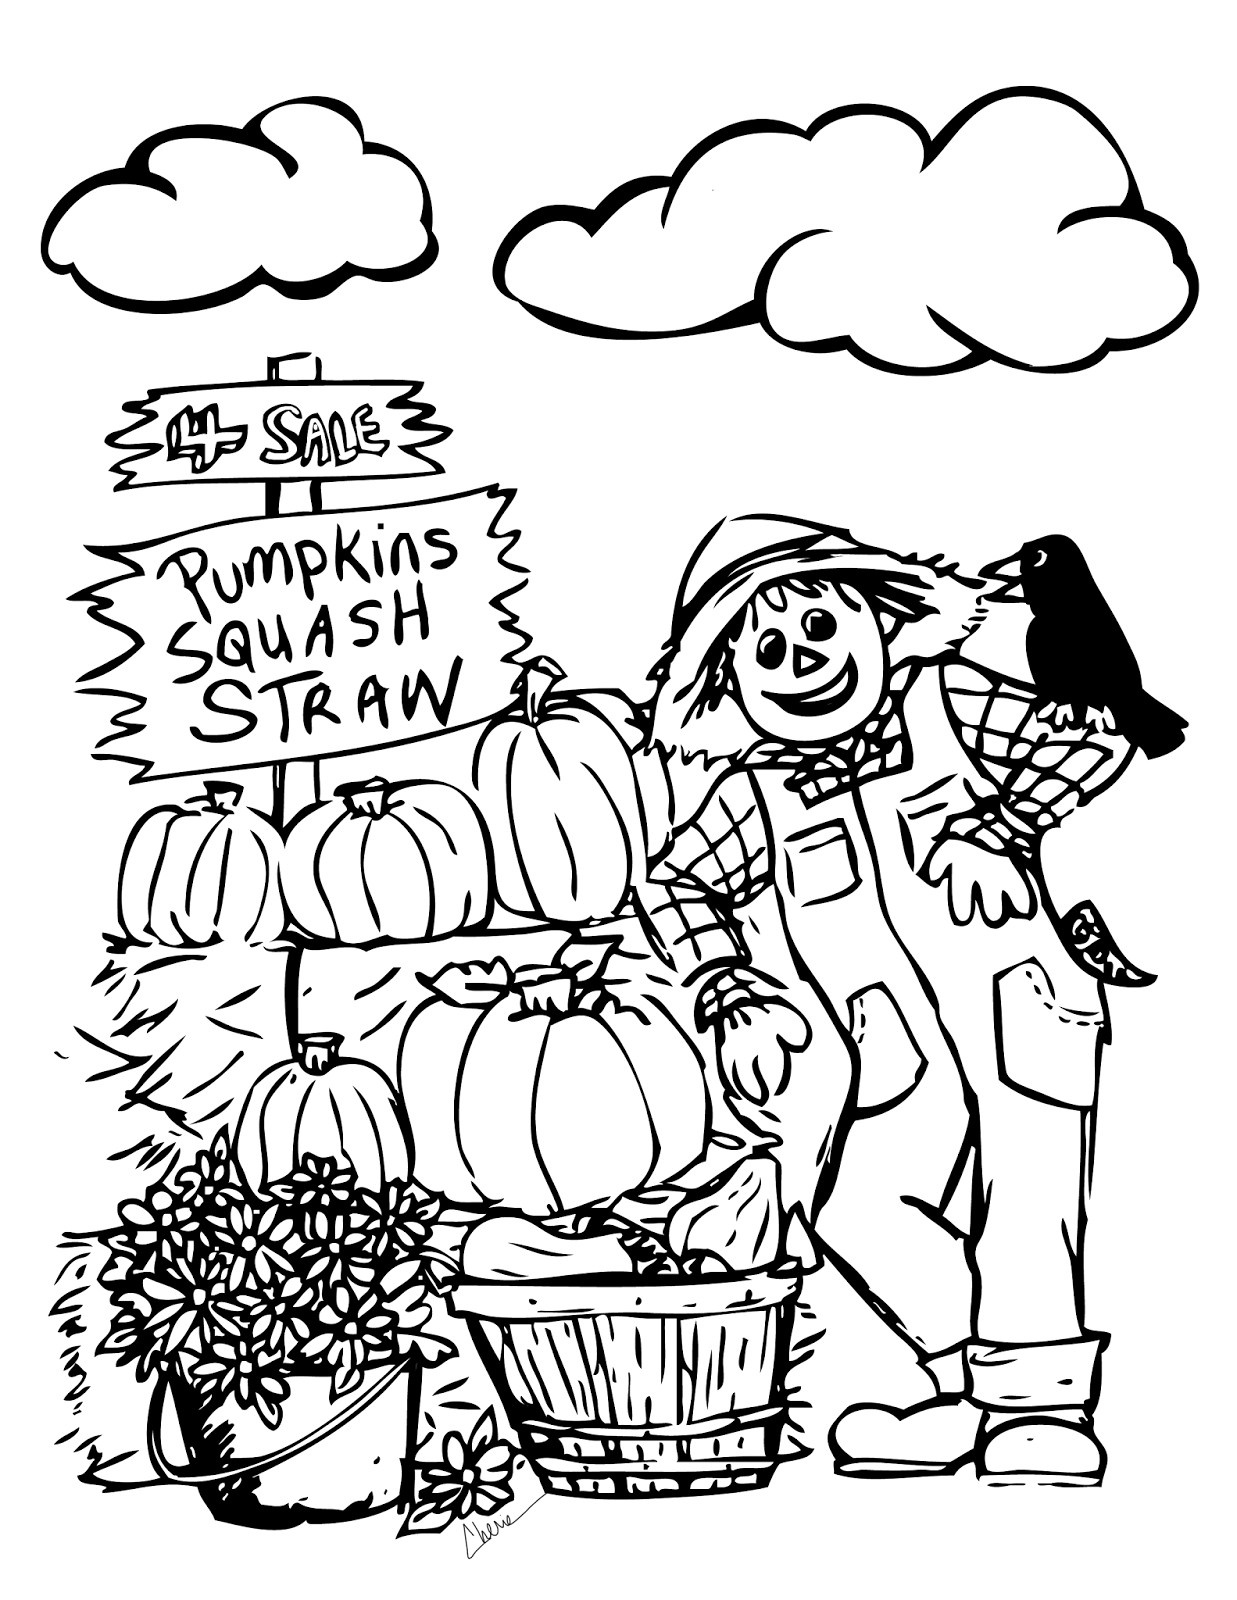 Free Printable Fall Coloring Pages For Kids - Best Coloring Pages - Free Printable Fall Harvest Coloring Pages